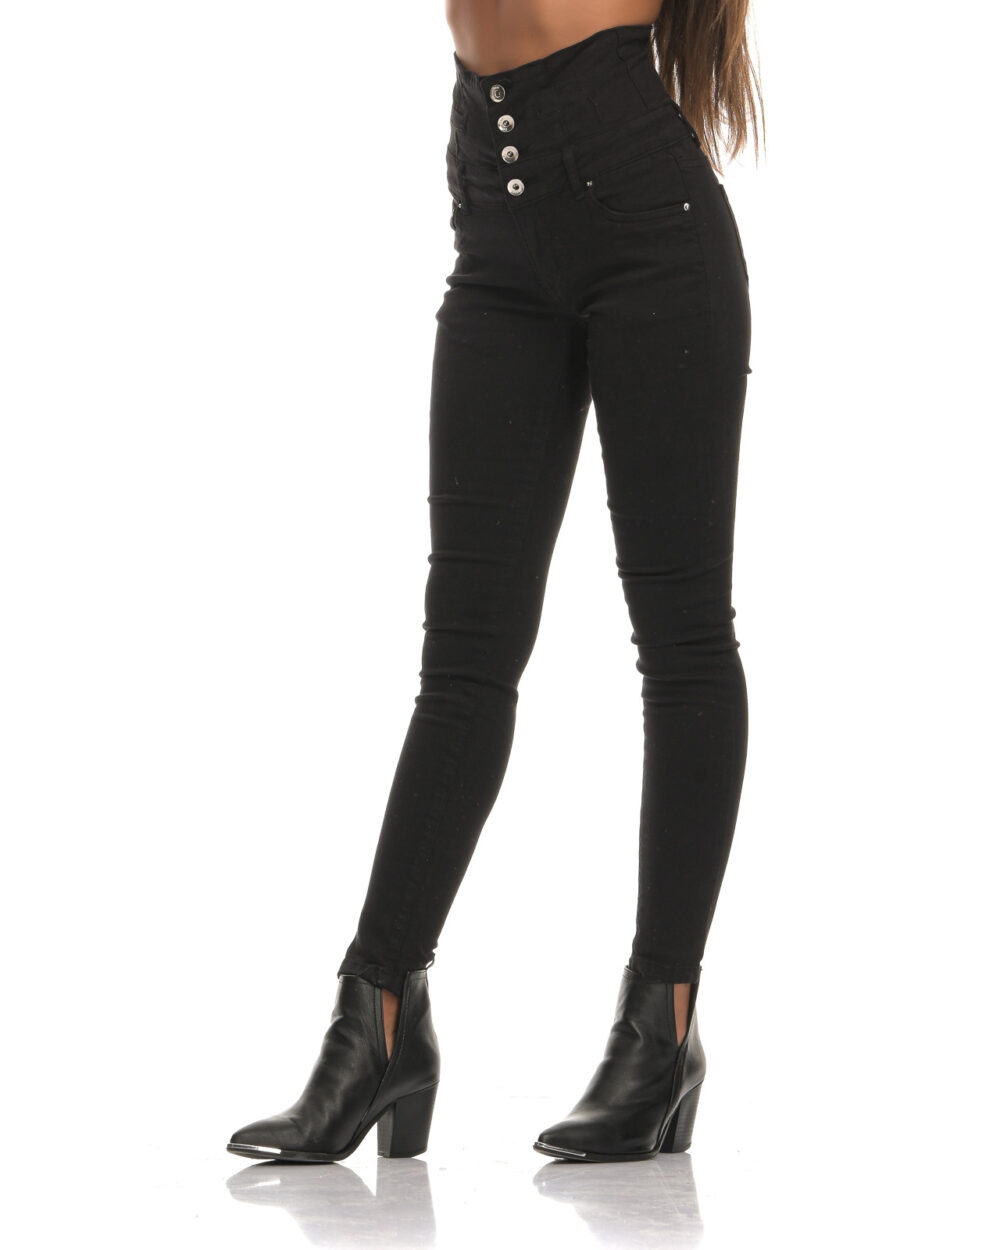 Black high-waisted elastic pants with buttons